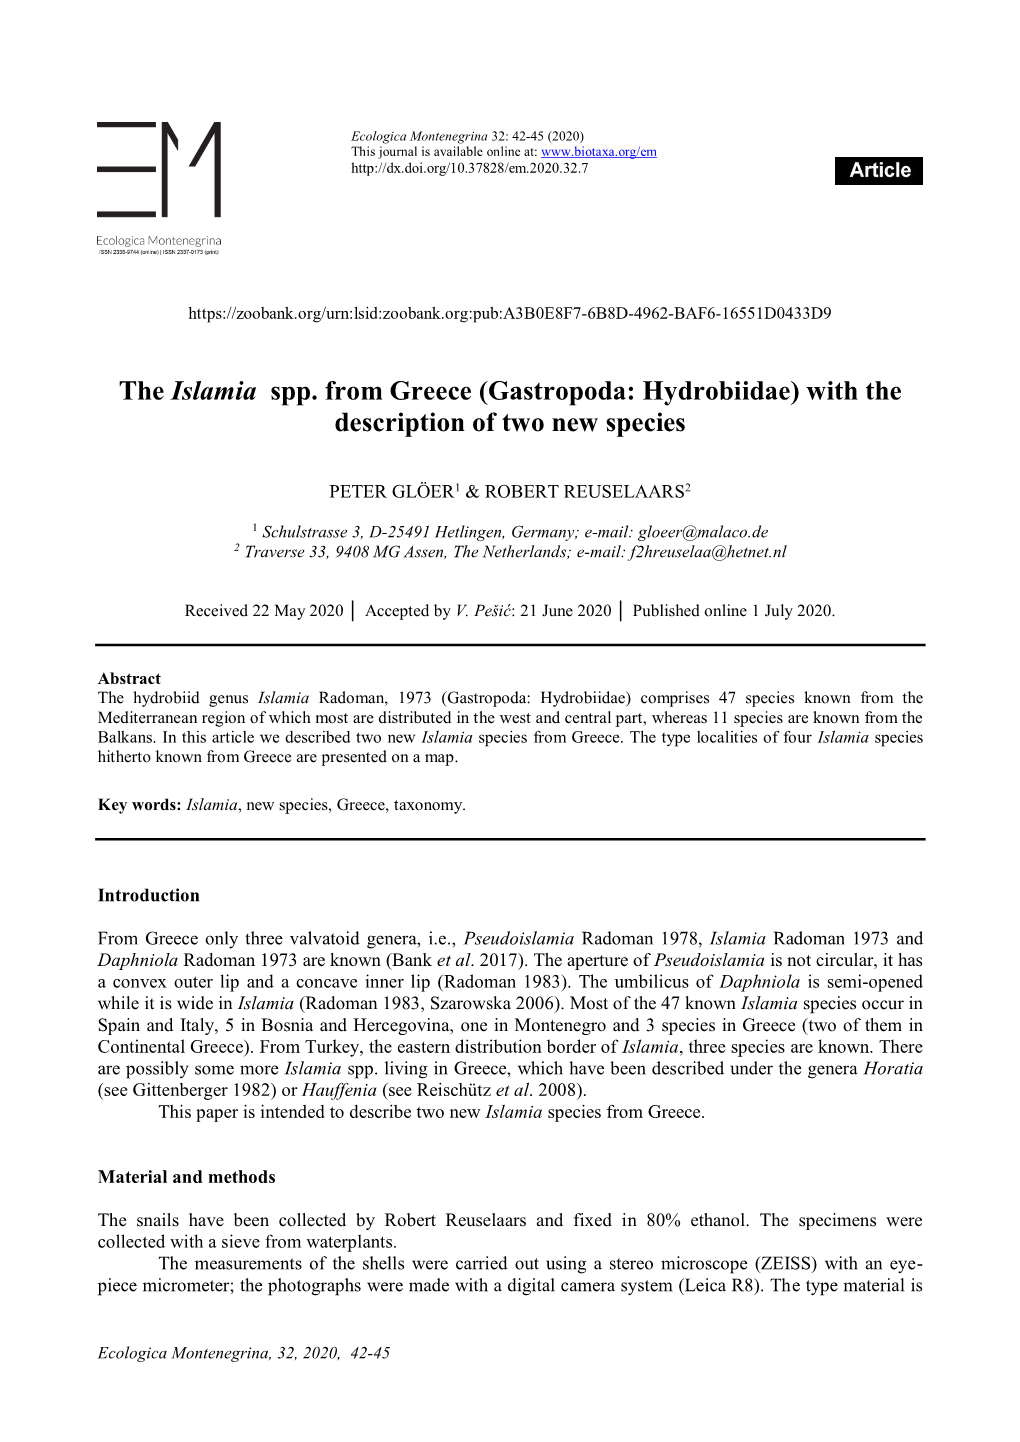 Gastropoda: Hydrobiidae) with the Description of Two New Species